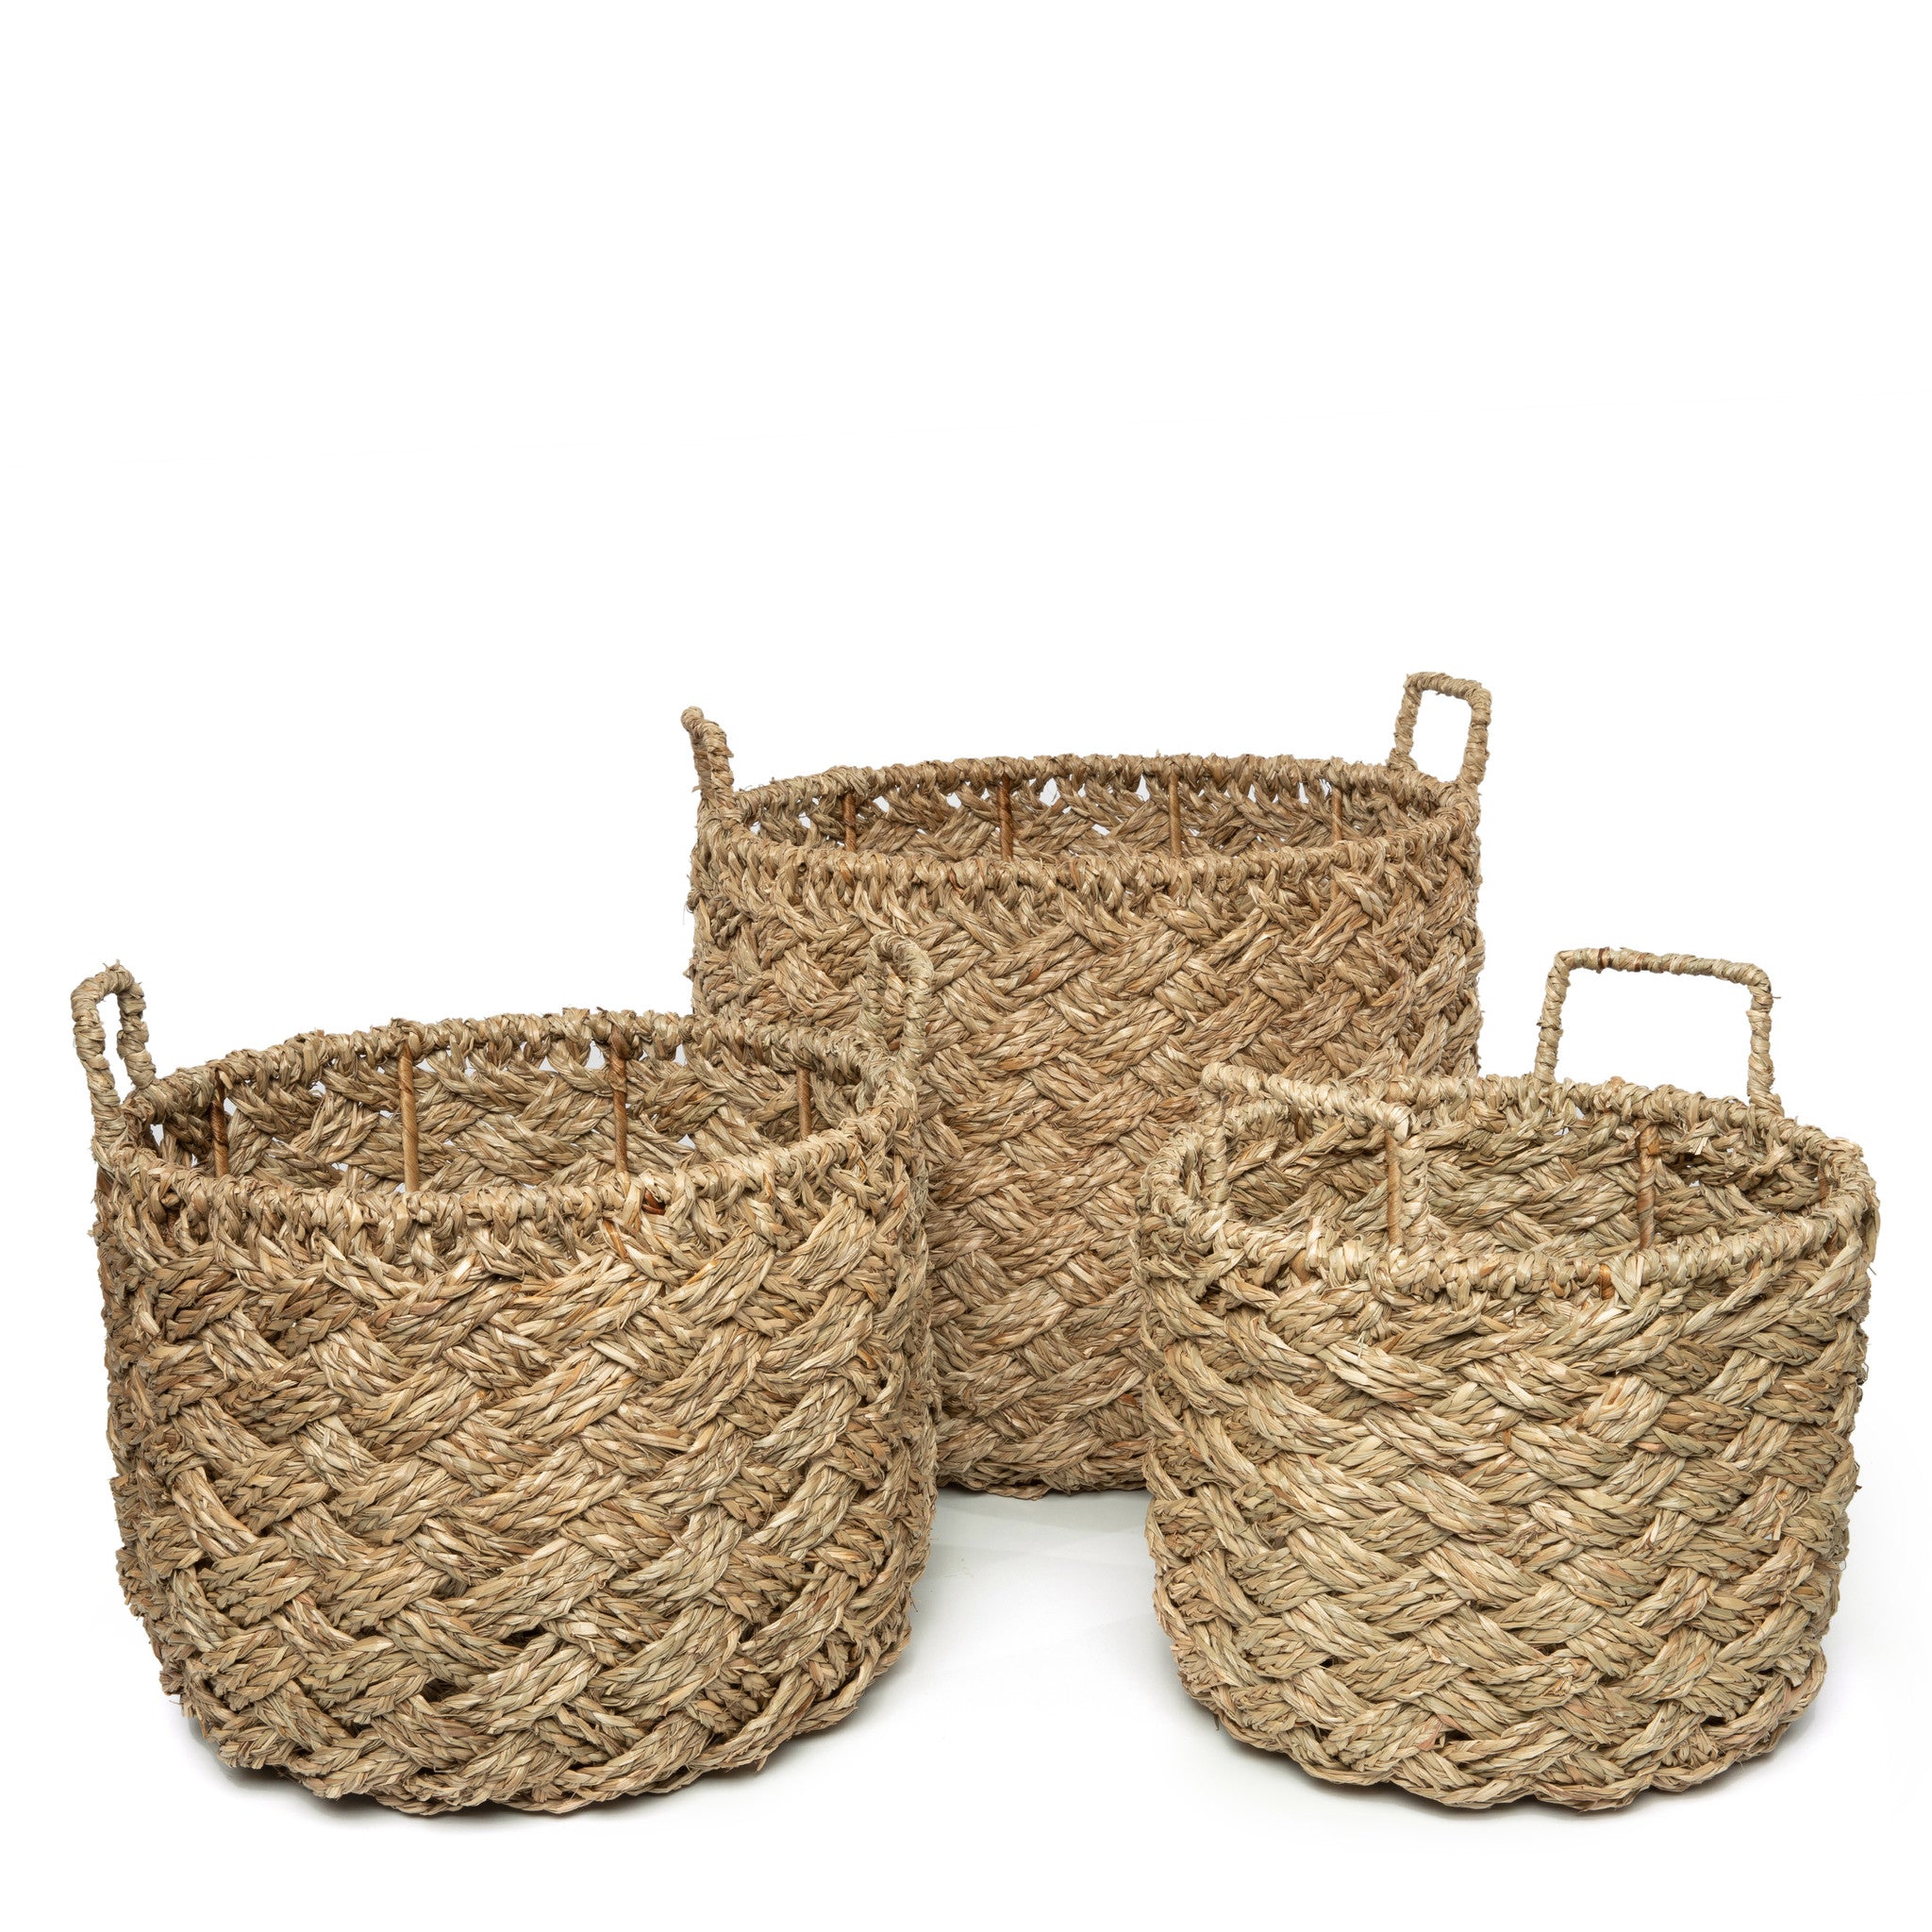 THE HOI AN Baskets Set of 3 front view